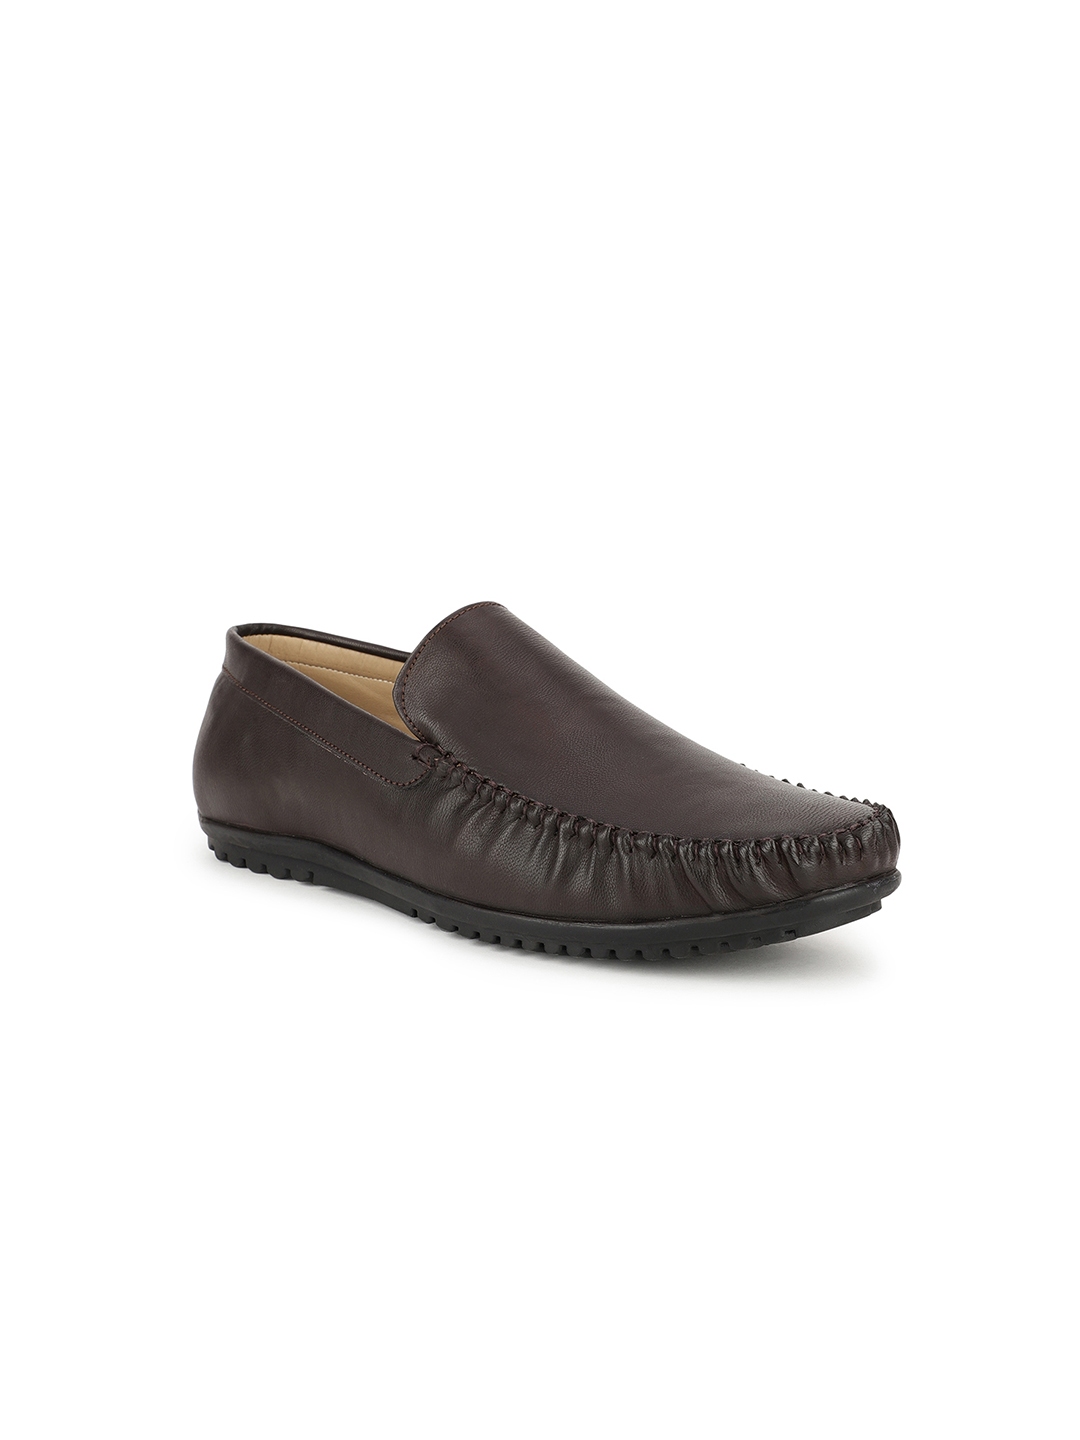 Buy Carlton London Men Brown Loafers - Casual Shoes for Men 15191892 ...